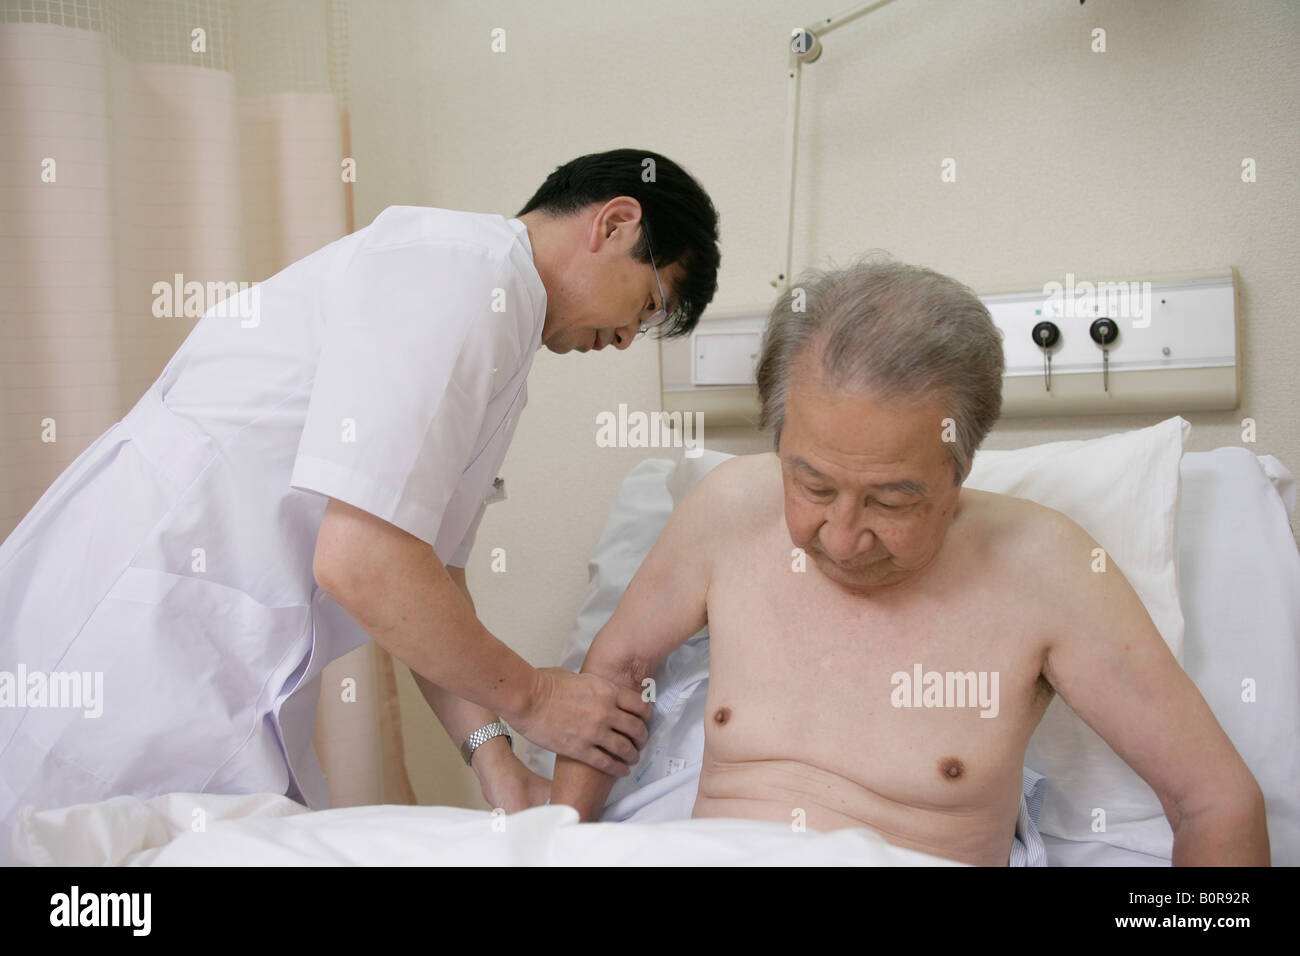 Male nurse undressing patient in hospital bed Stock Photo - Alamy